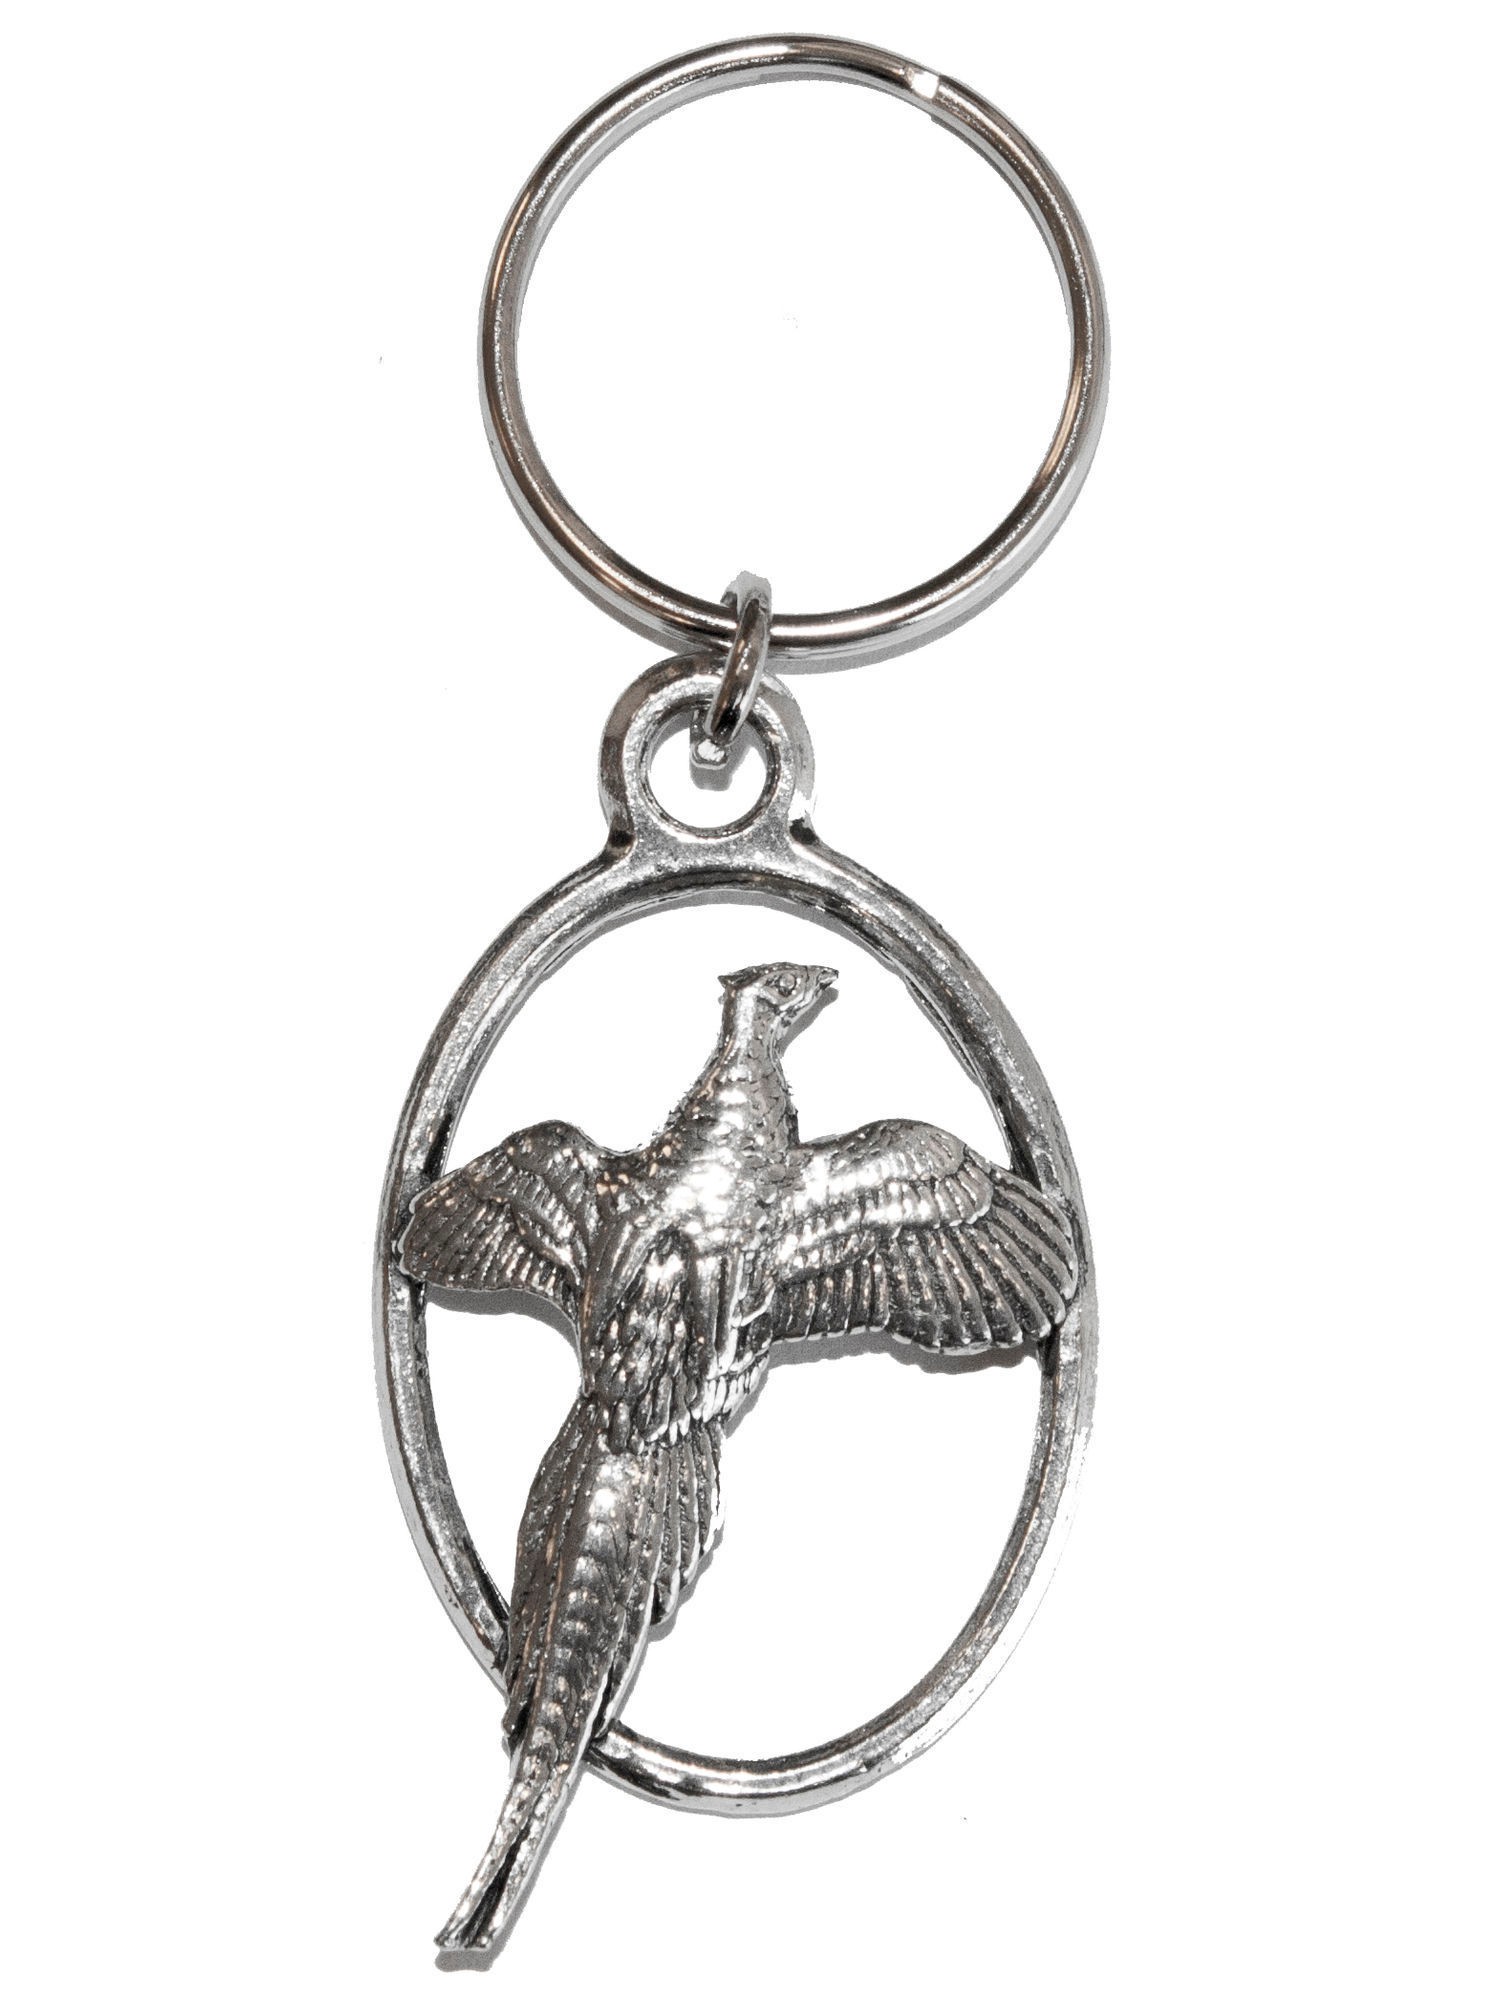 PHEASANT SMALL Pewter Keyring 30mm Hand Crafted FREE UK Delivery!